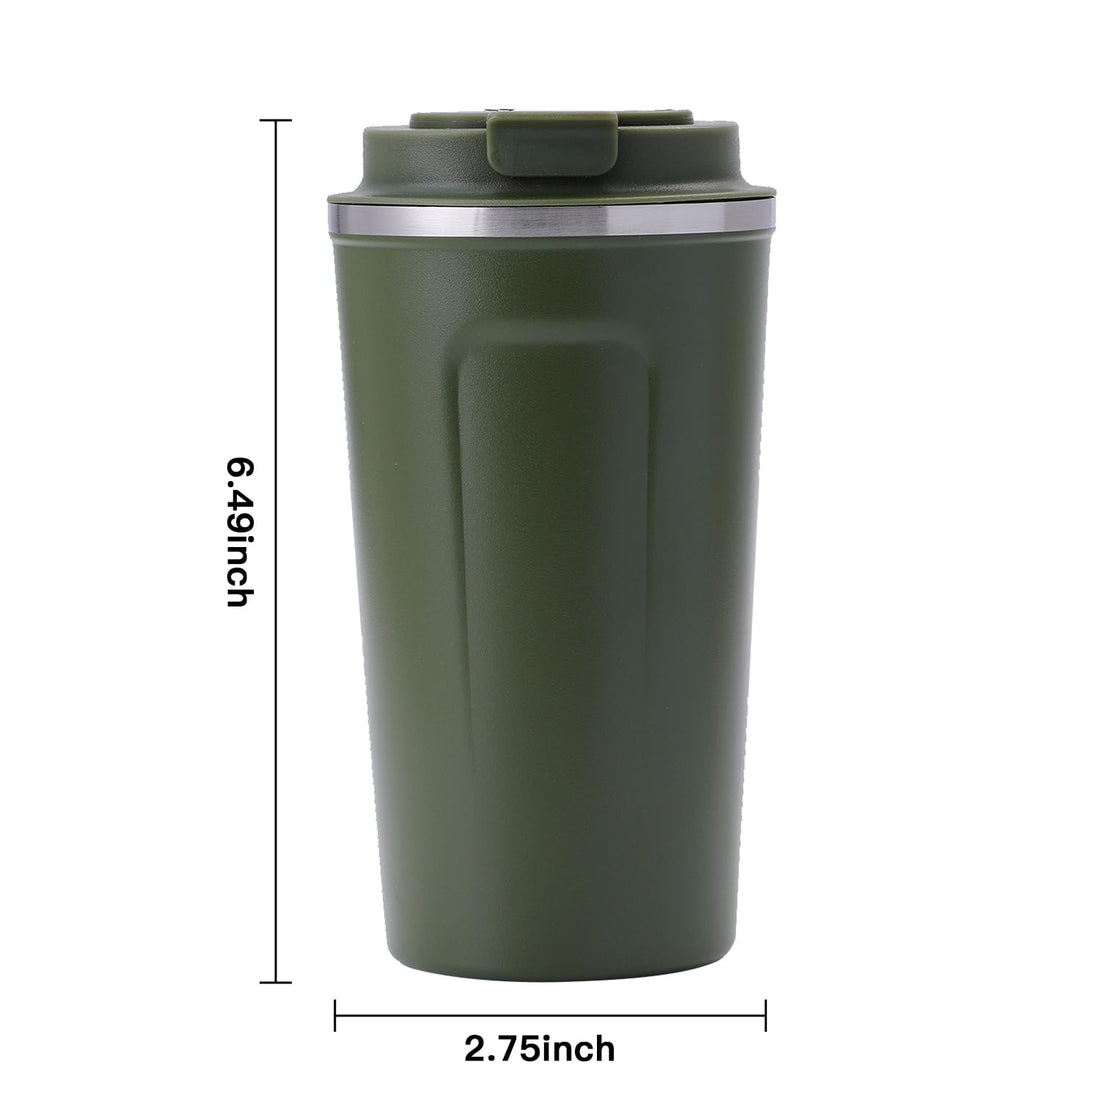 17.2oz Insulated Coffee Mug with Smart LED Temperature Display, Reusable Stainless Steel Coffee Cup Double Wall Vacuum Insulated Water Bottle for Hot and Cold Water Coffee (CWB Green)